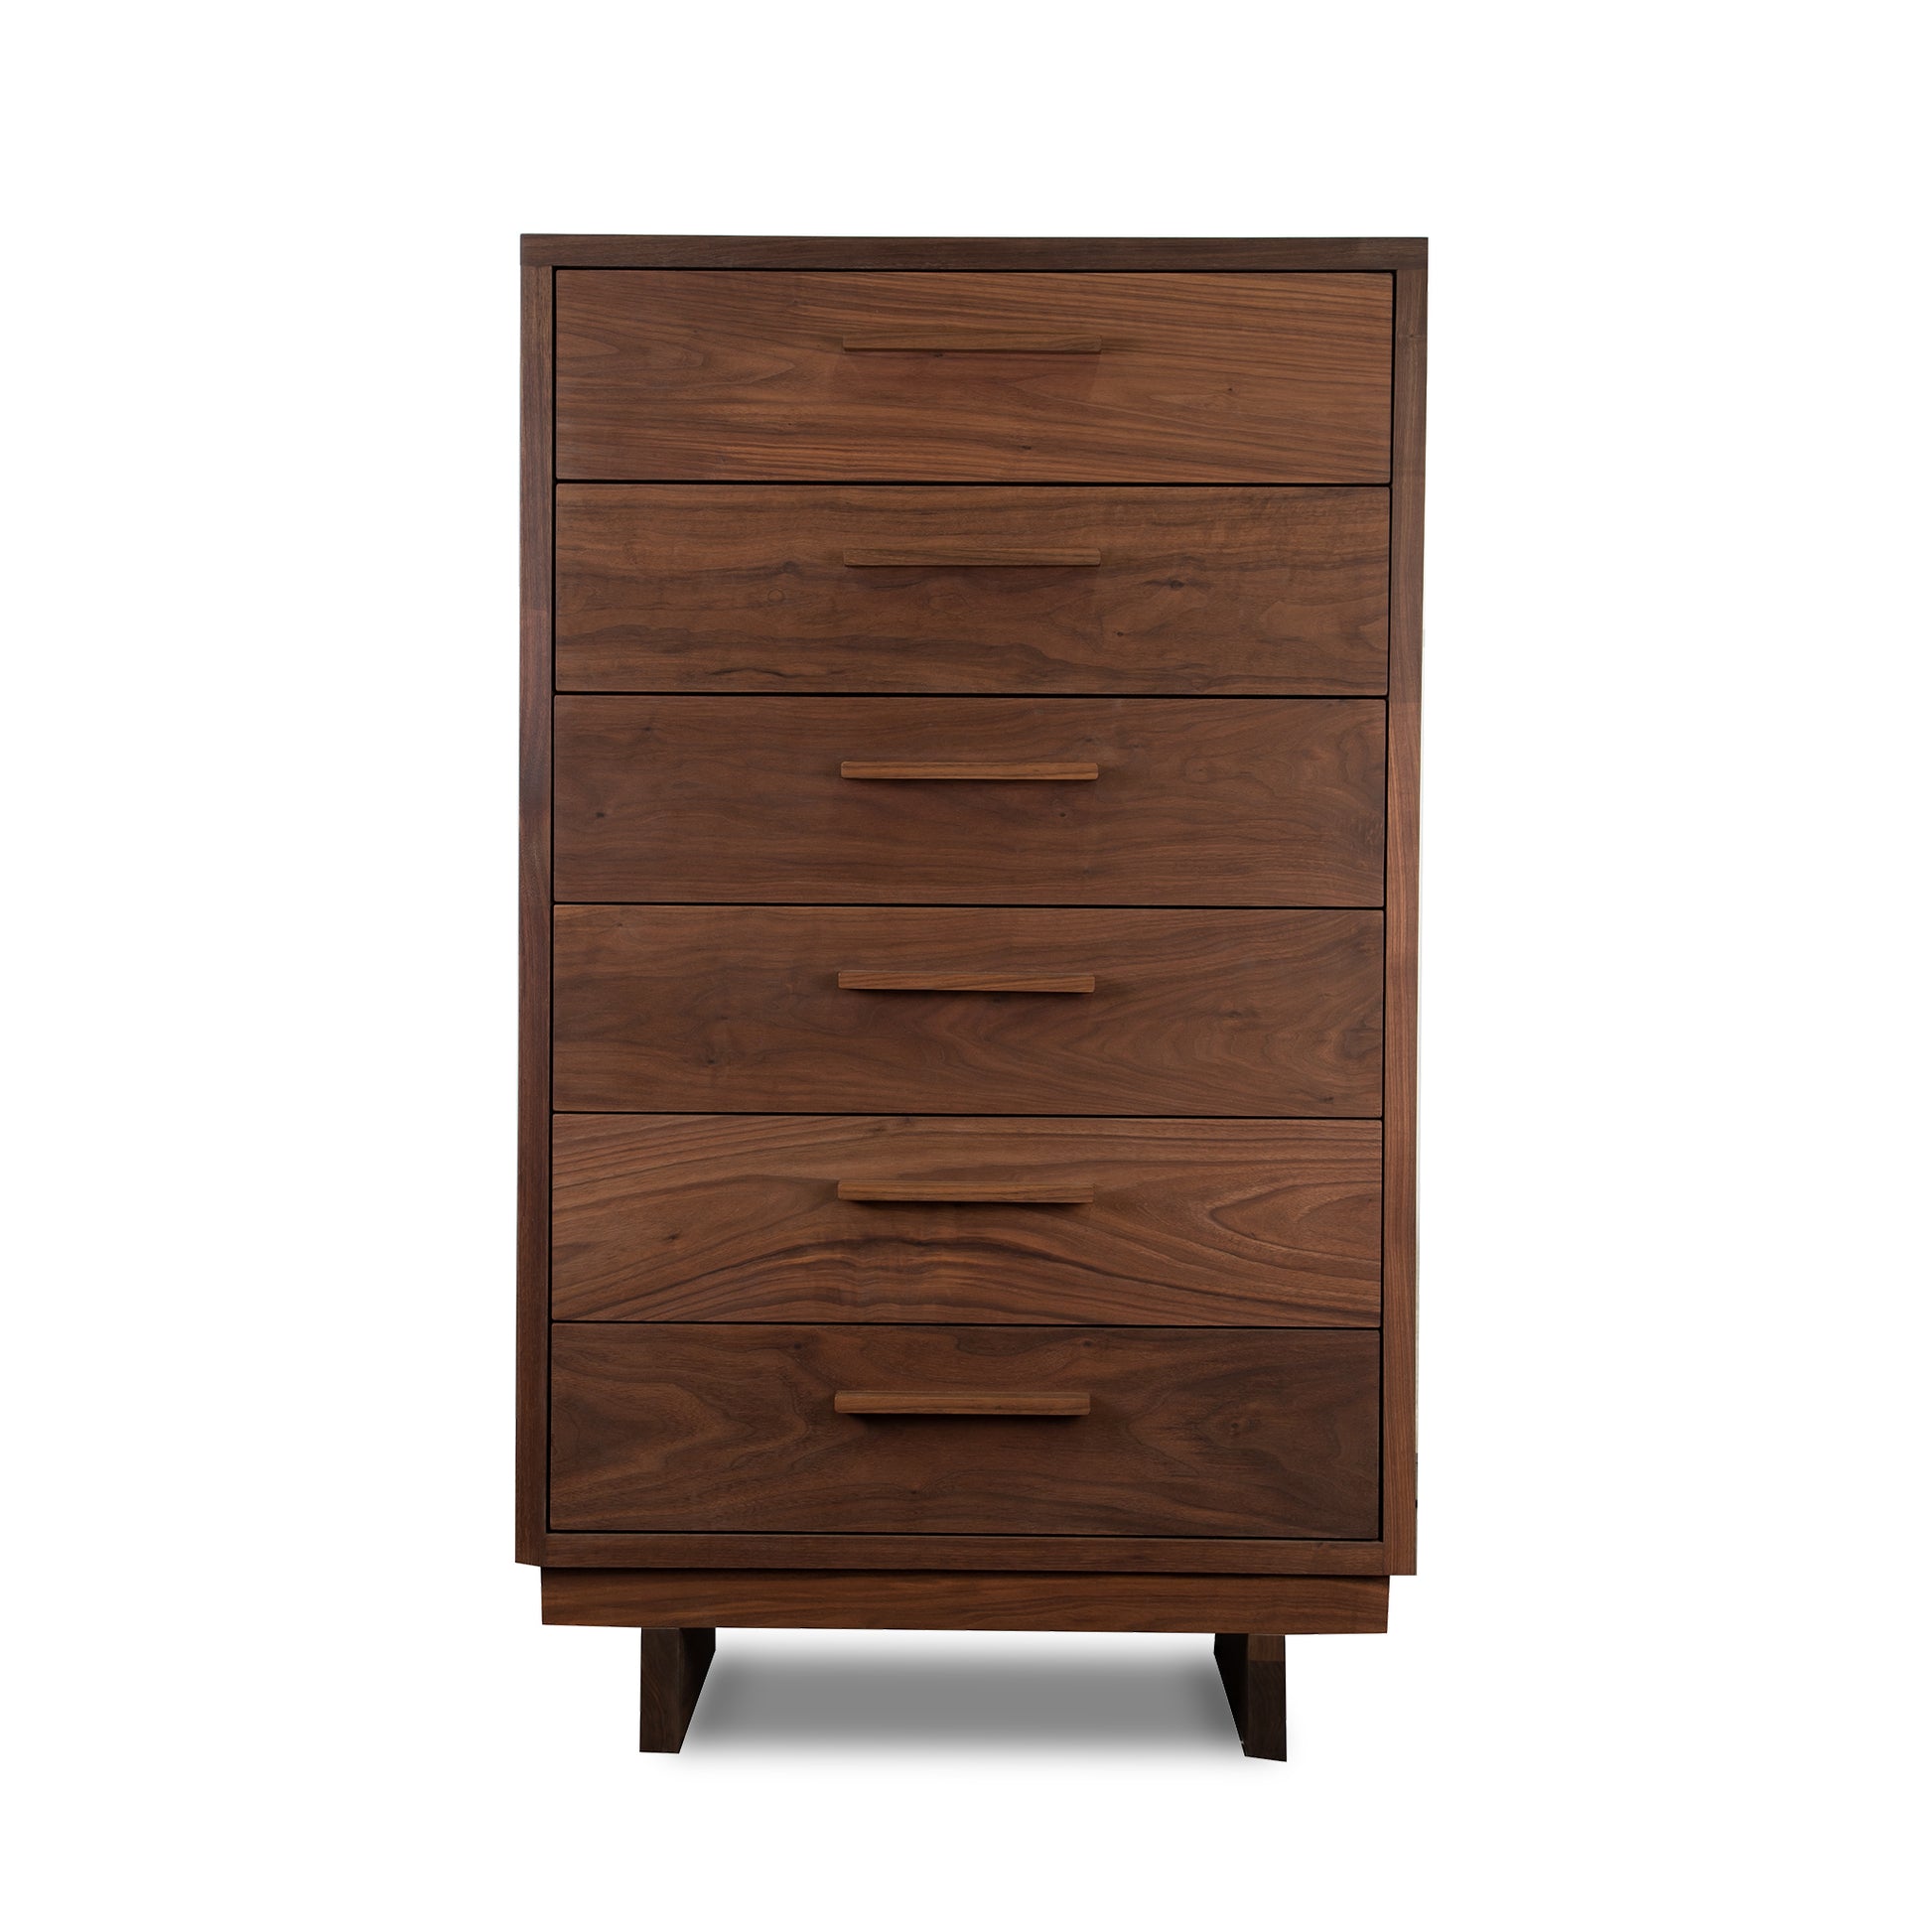 A modern chest of drawers with a walnut finish.